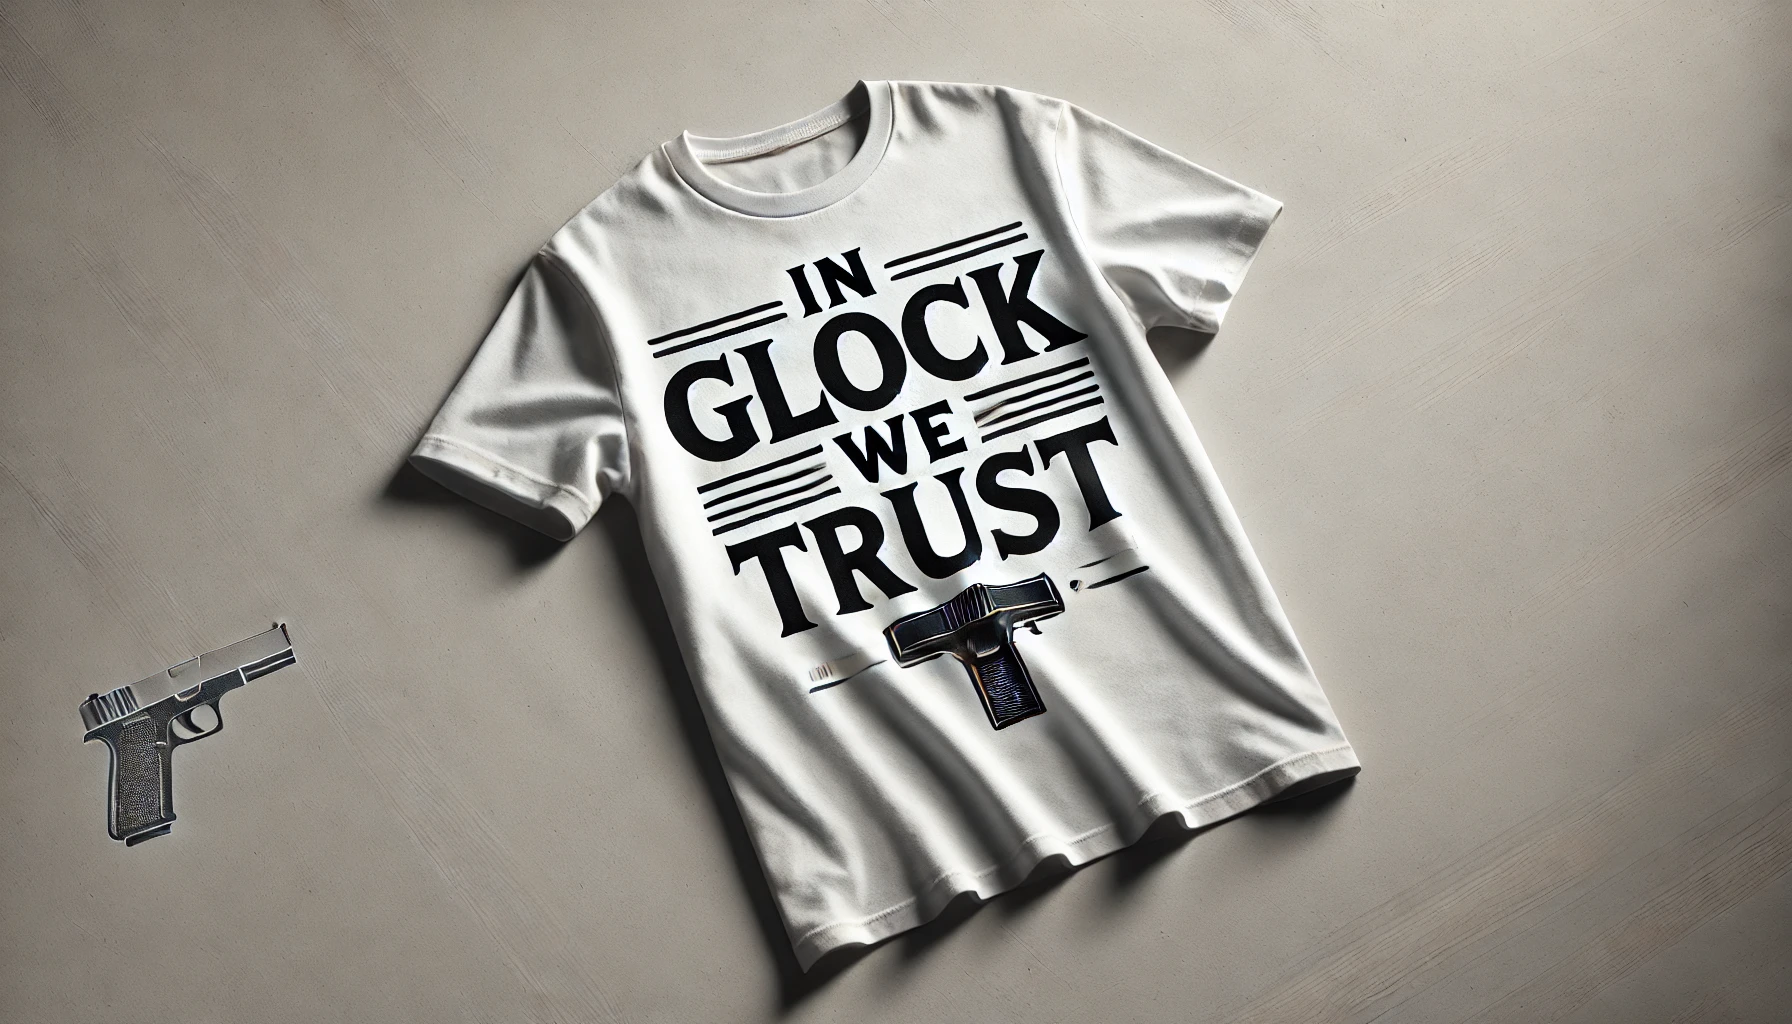 In Glock We Trust Shirt: A Symbol of Loyalty and Power